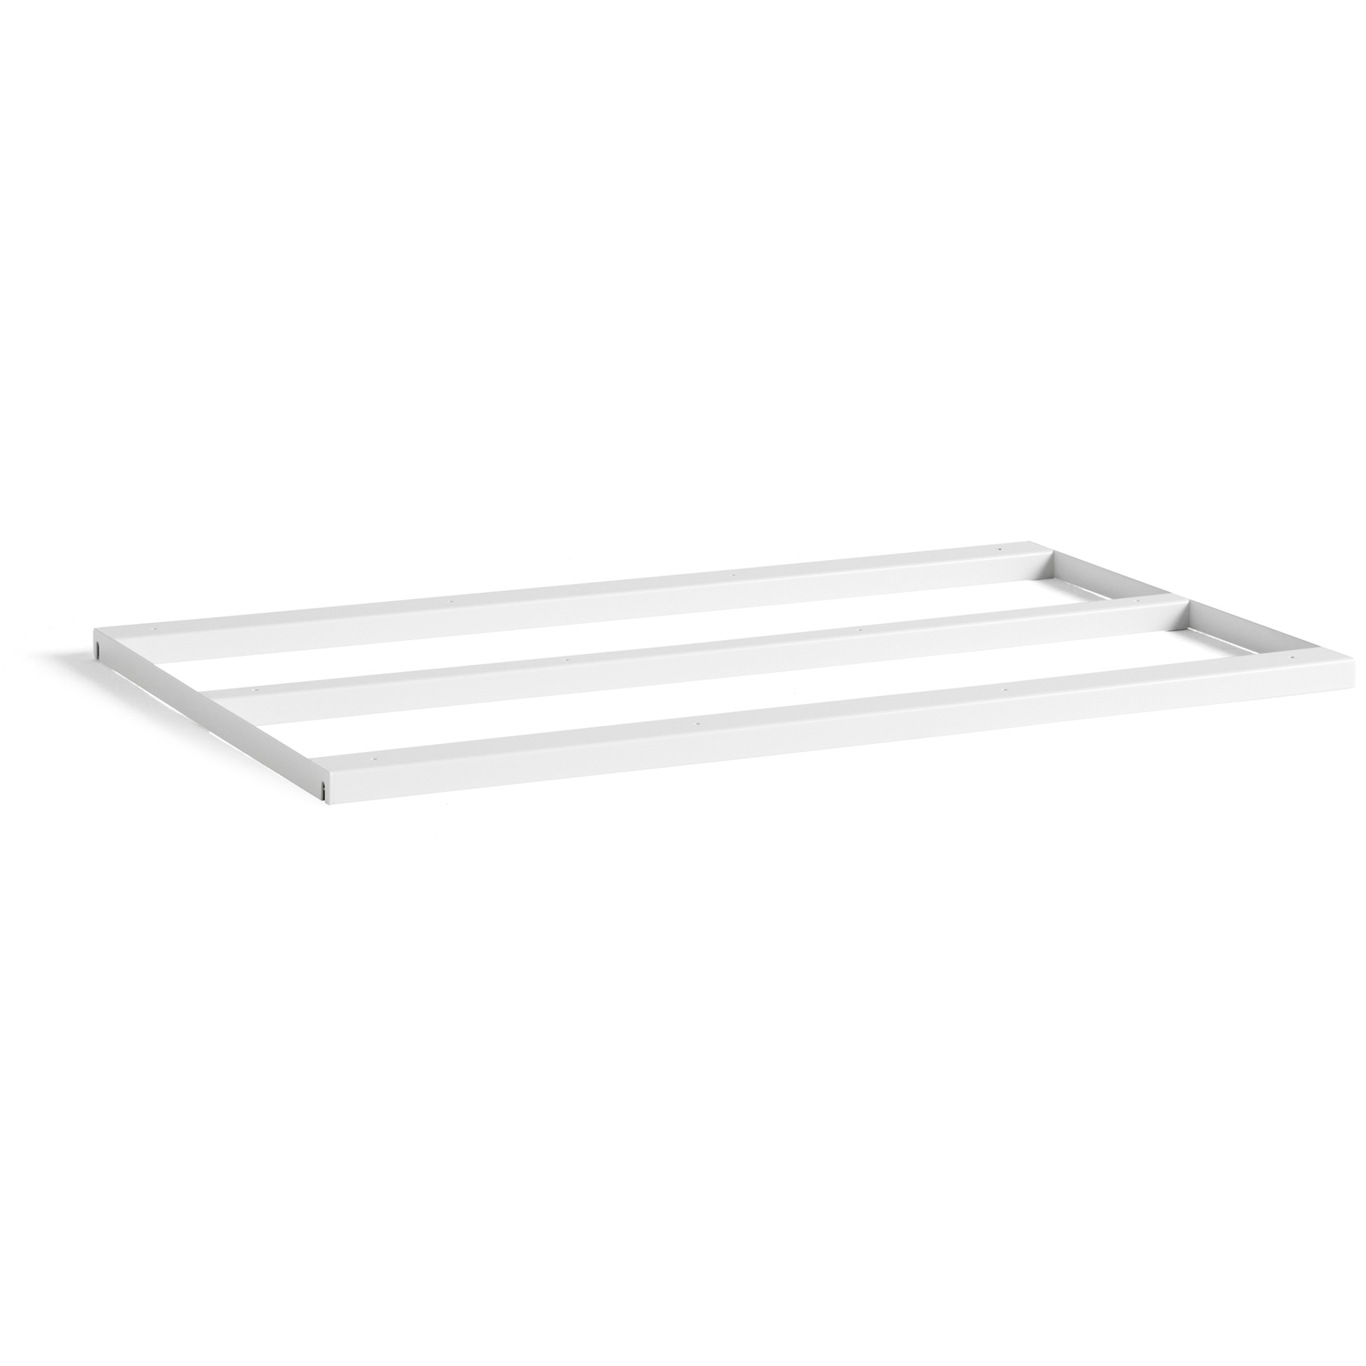 Loop Stand Support 160, White